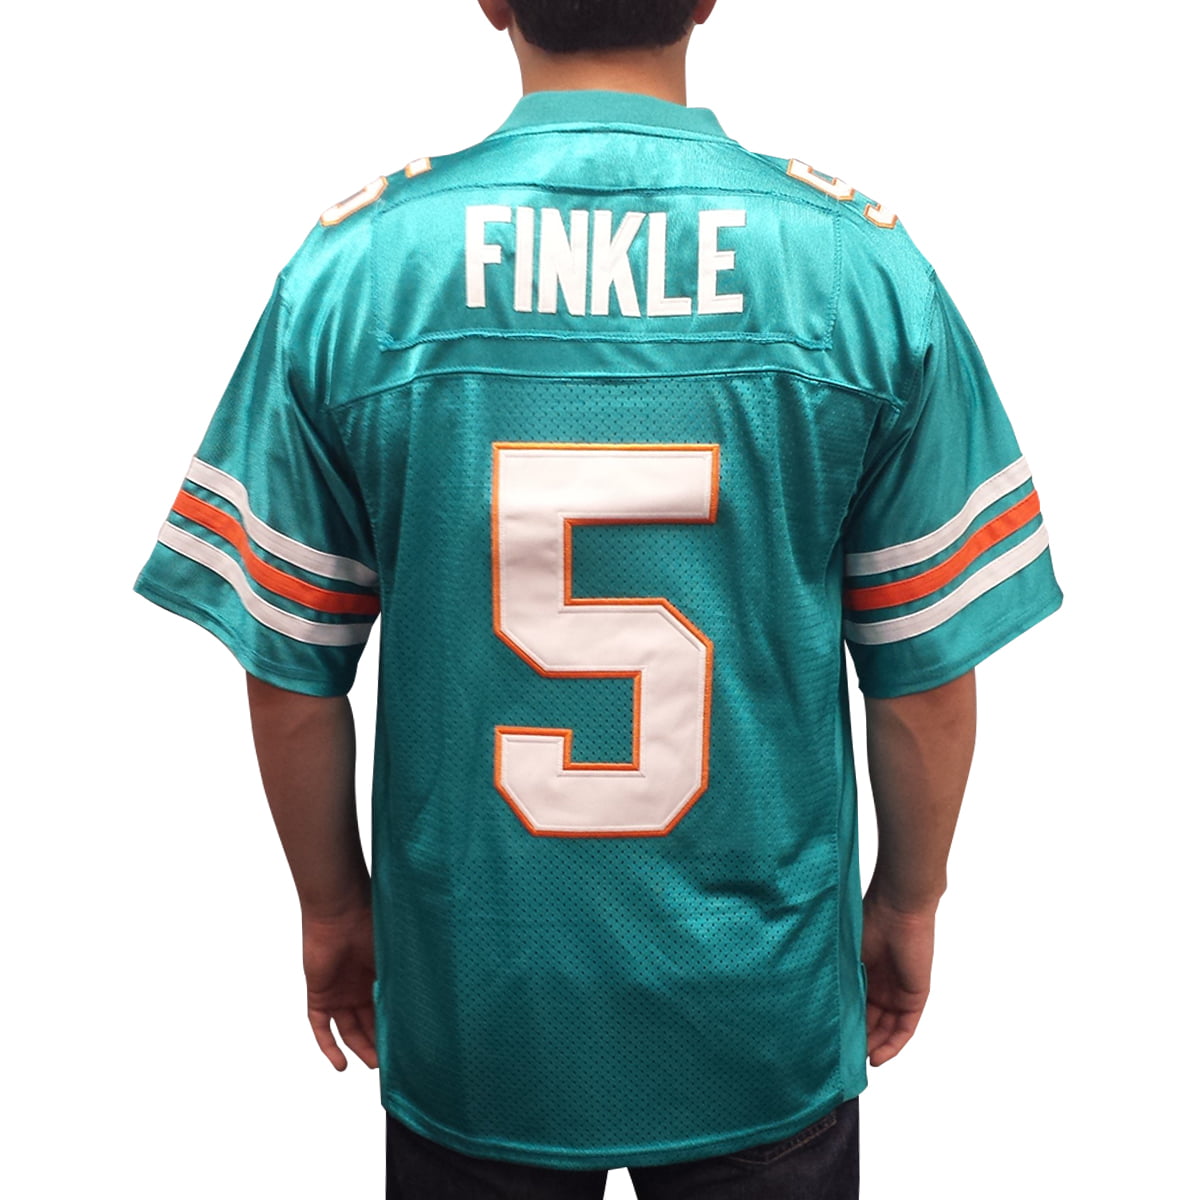 MyPartyShirt Ray Finkle #5 Miami Football Jersey Ace Ventura Pet Detective Dolphins Movie